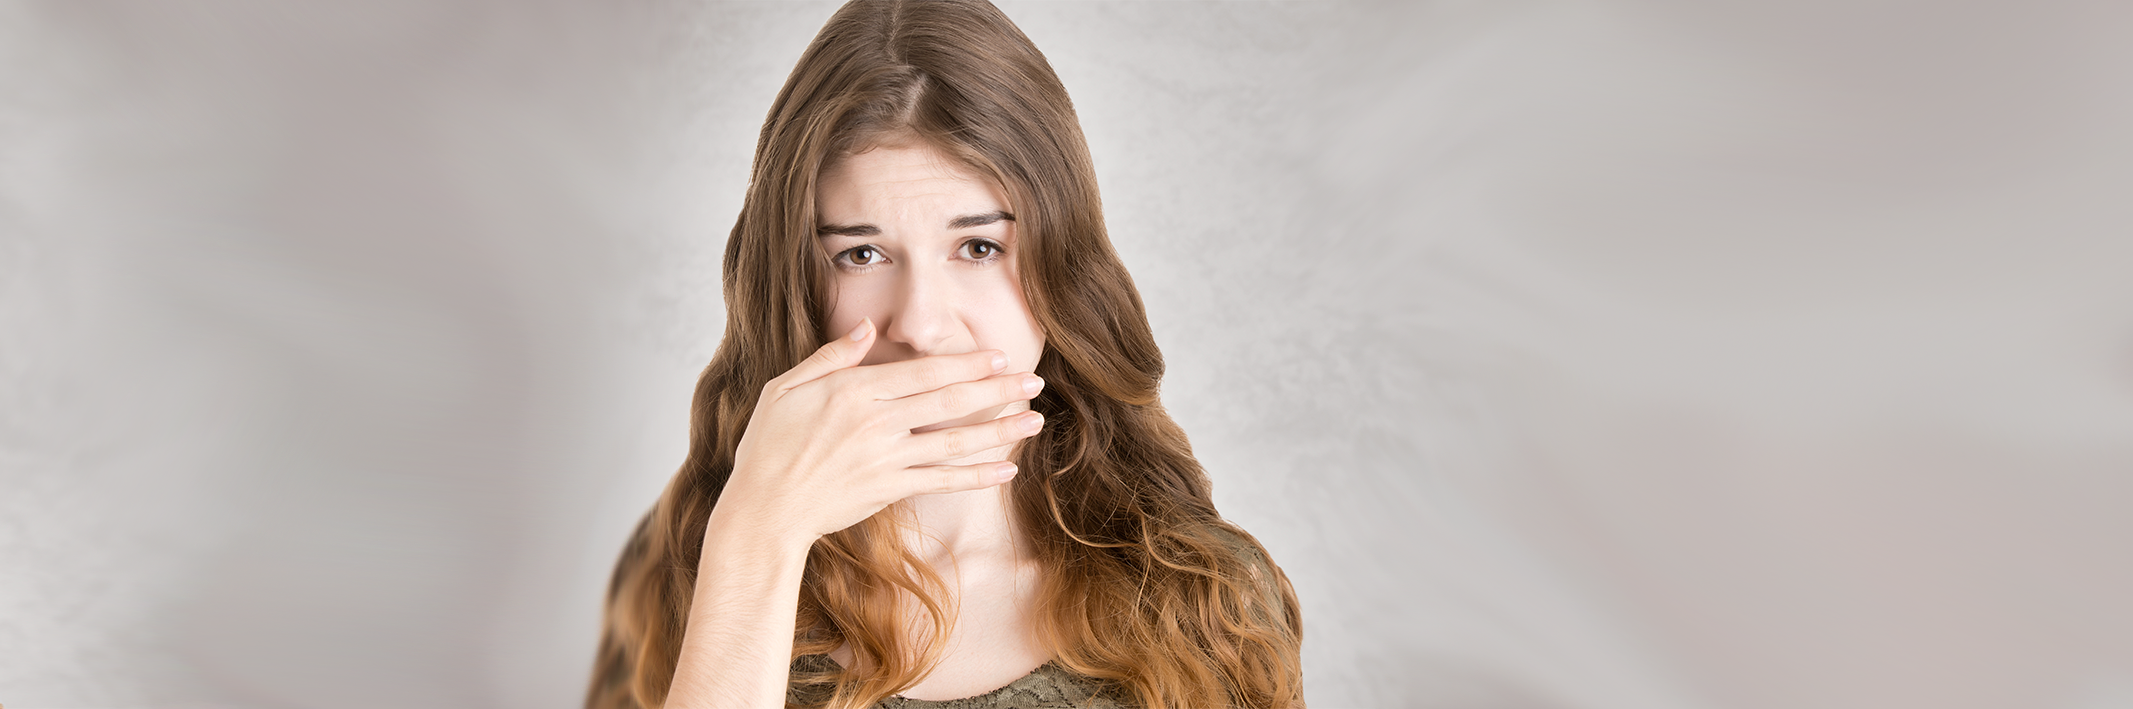 Dealing With Bad Breath During Party Season